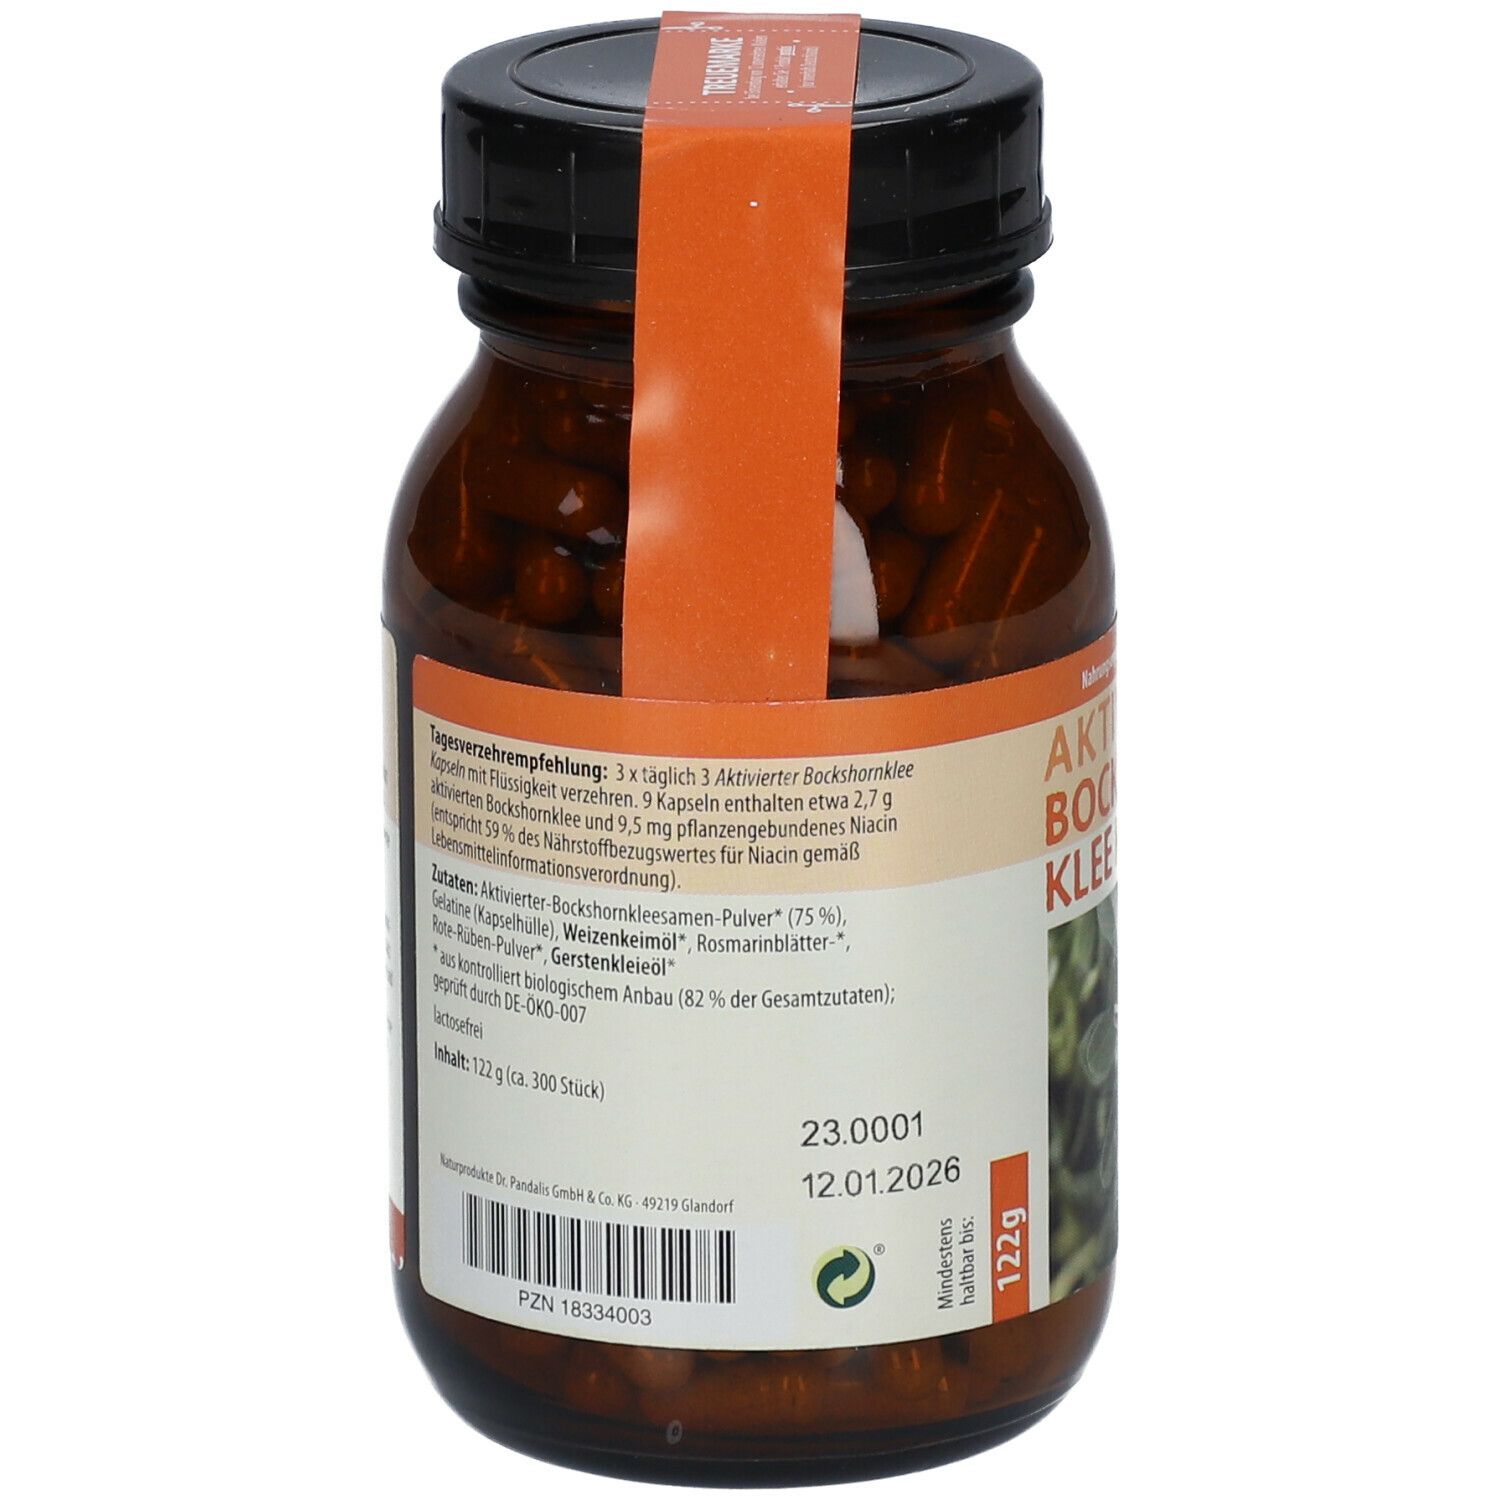 Dr. Pandalis Bockshorn clover activated capsules